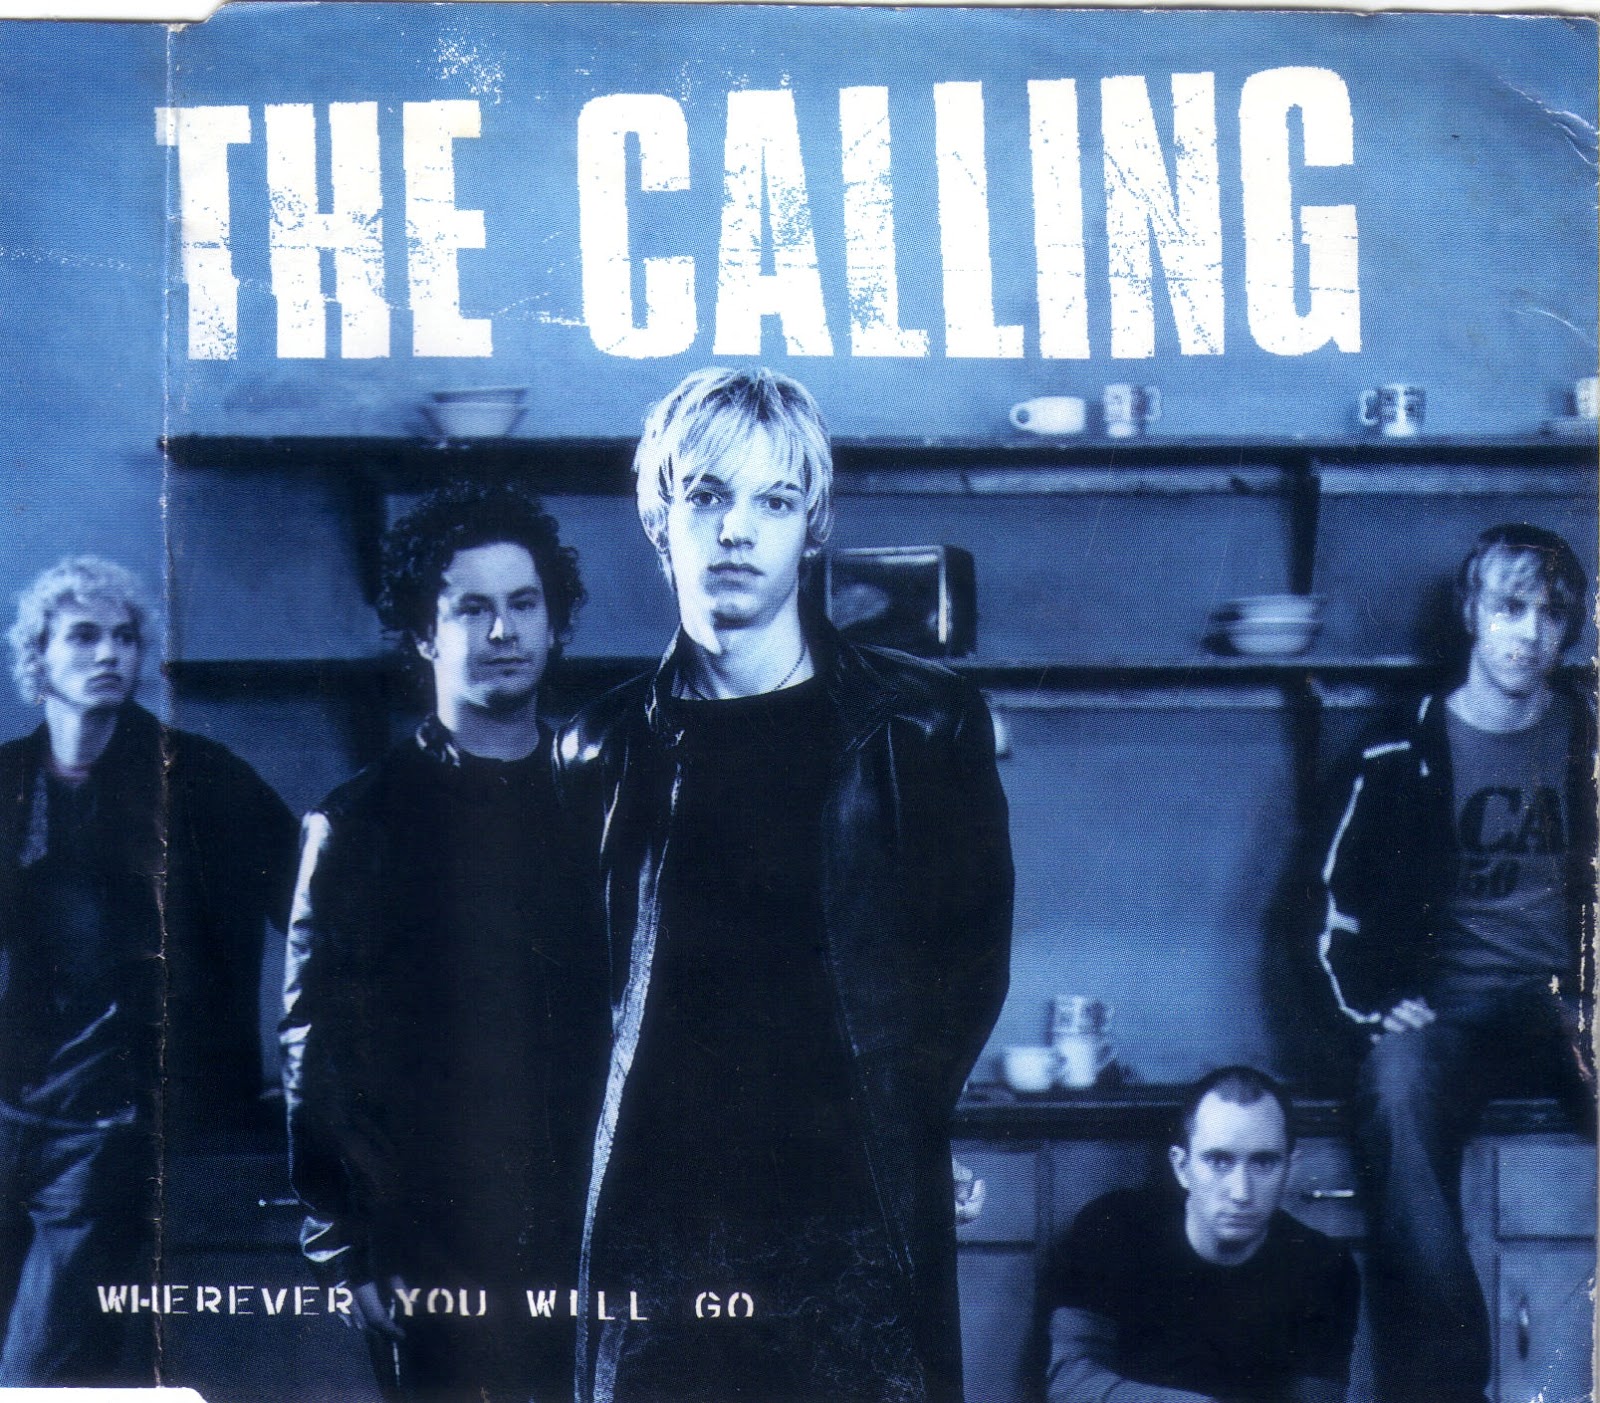 The calling series